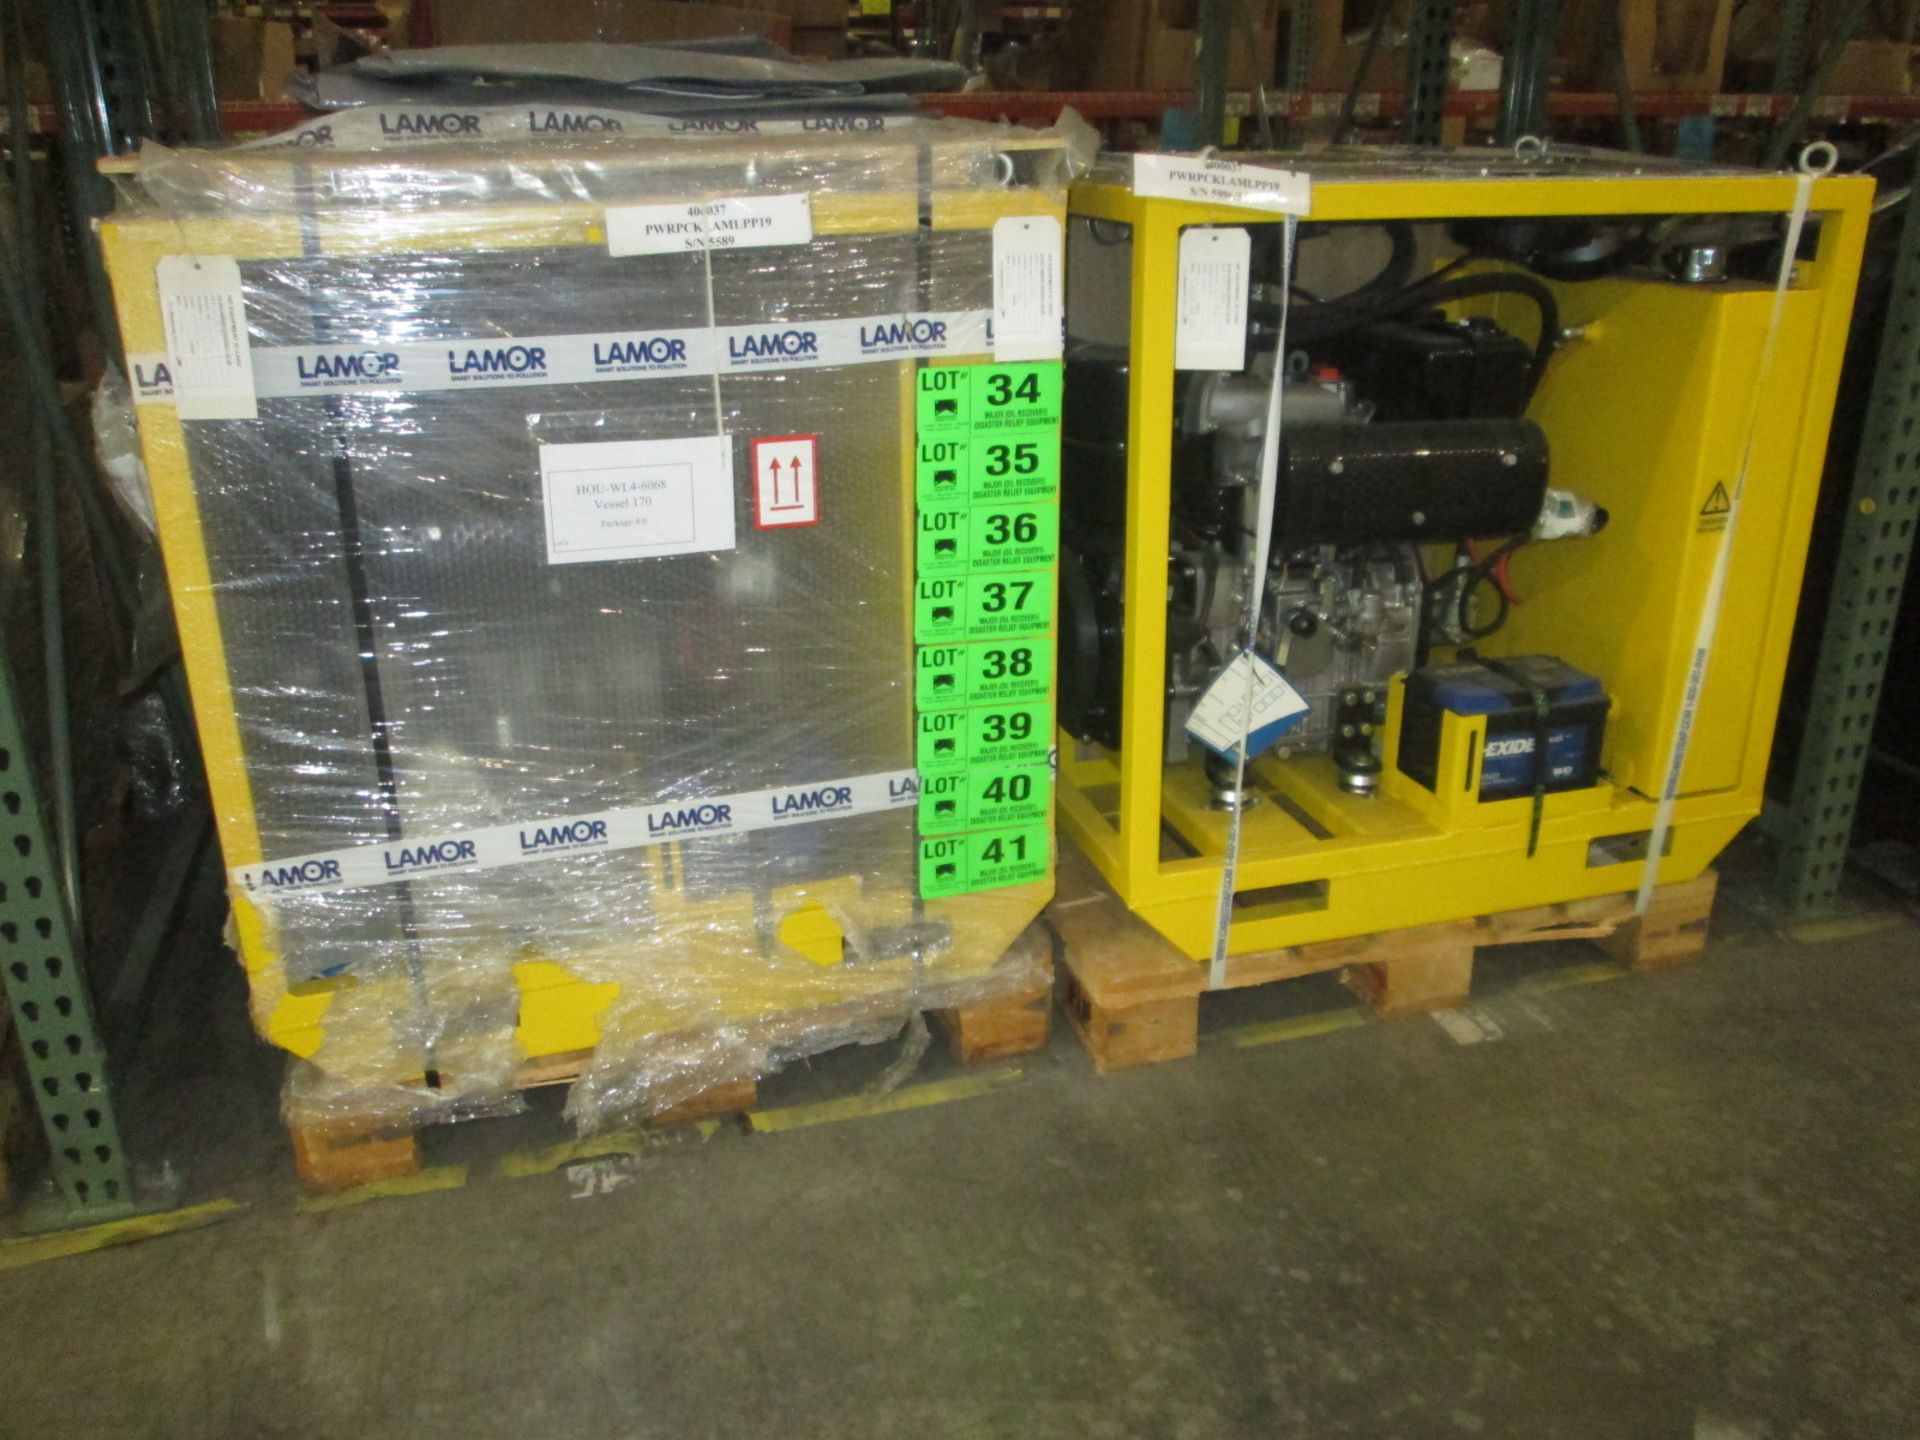 LAMOR SLICKBAR LPP 19 ENCLOSED HYDRAULIC POWER PACK WITH LOMBARDINI DIESEL ENGINE AND ELECTRIC START